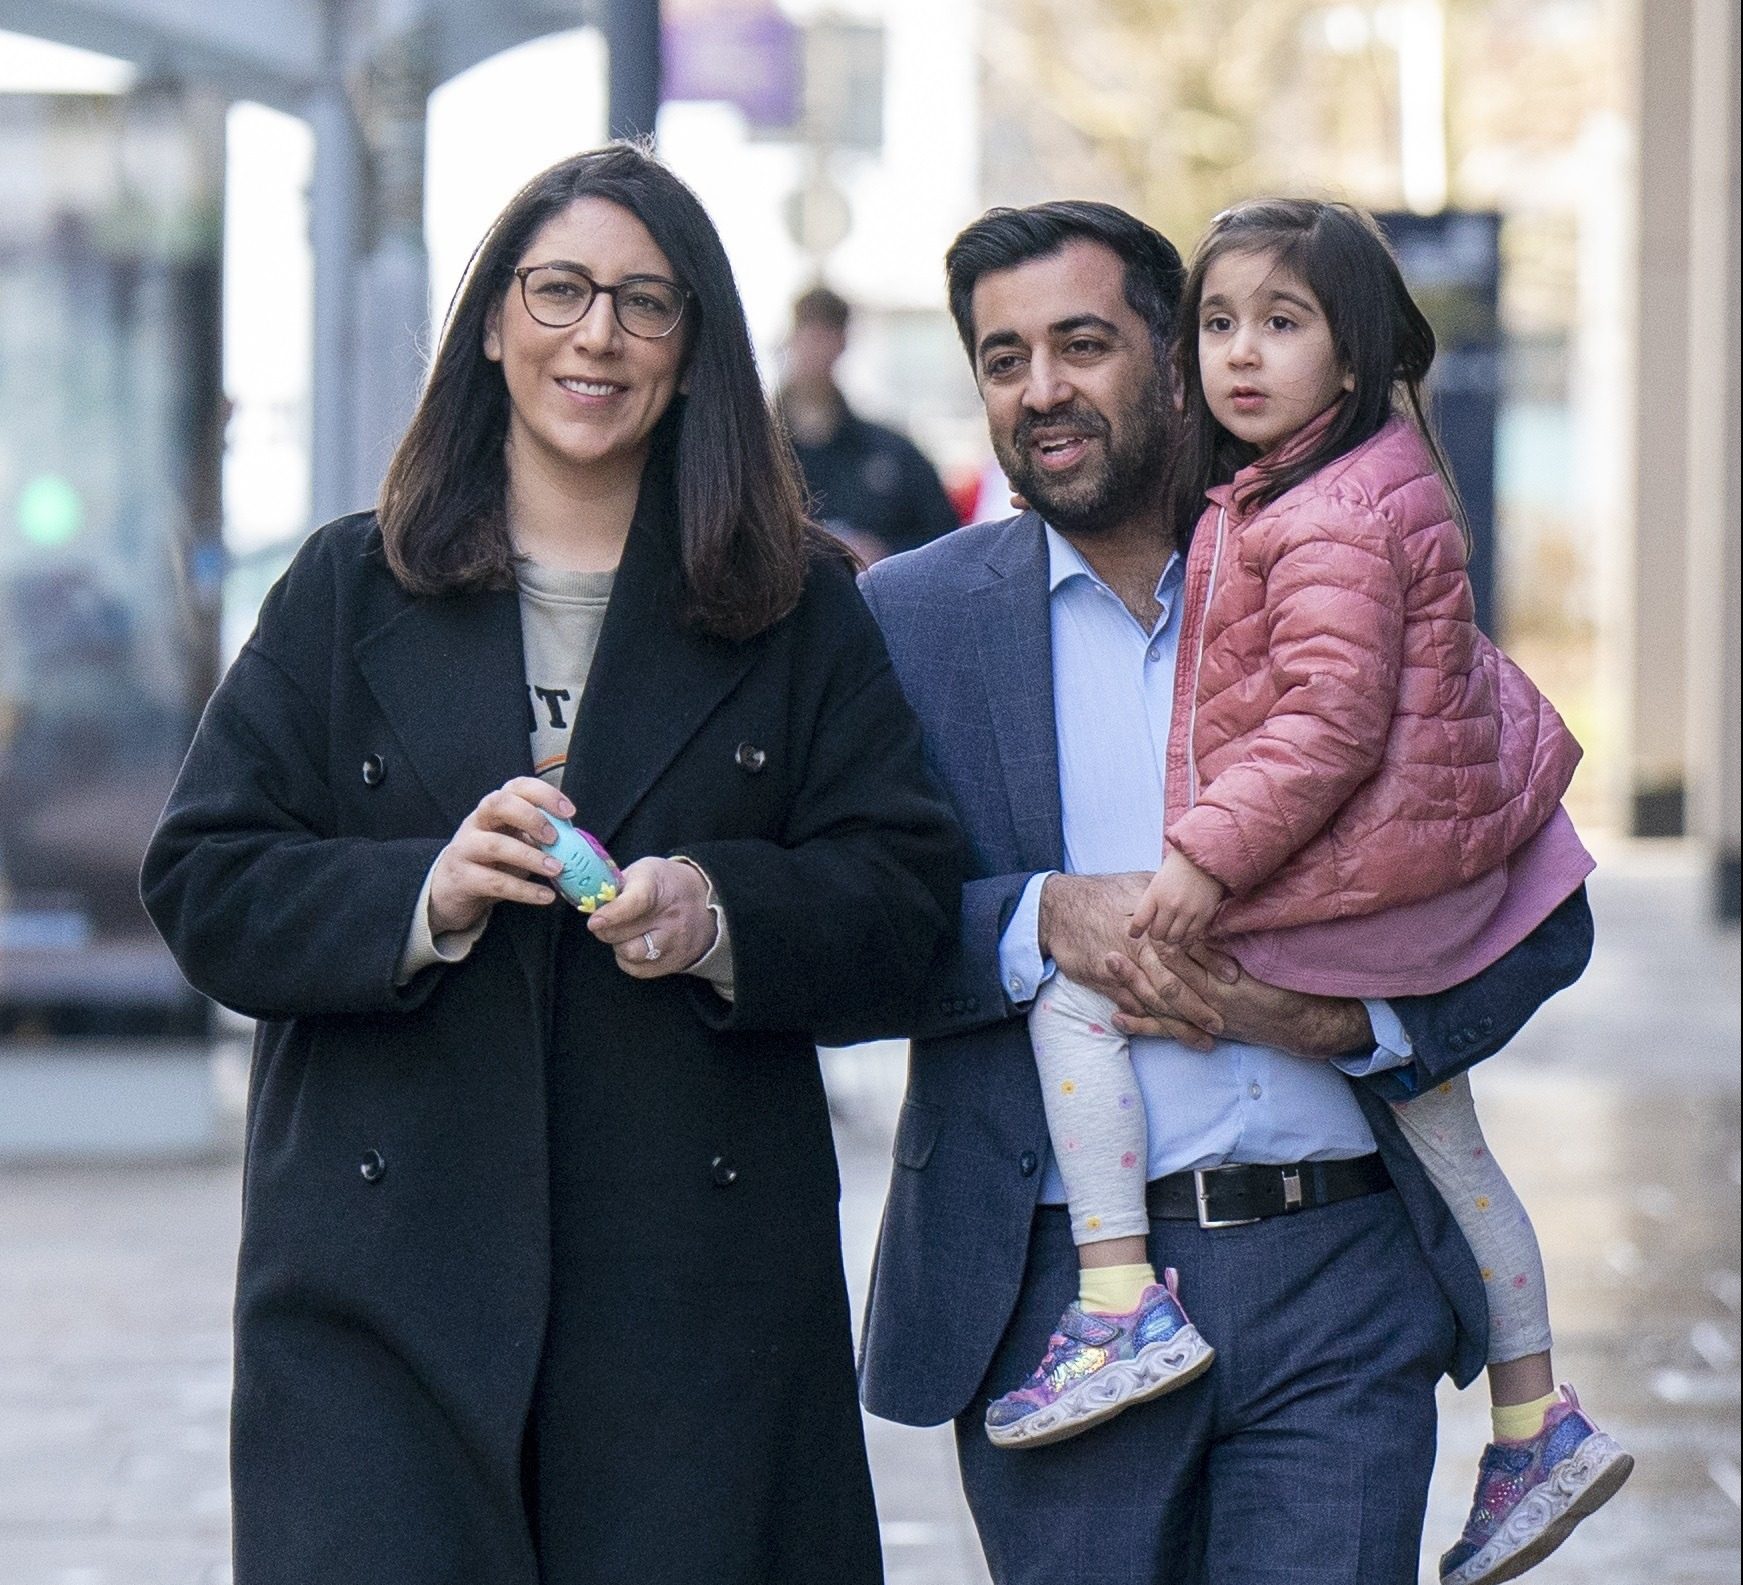 Humza Yousaf arrives with his wife Nadia El-Nakla and daughter Amal for the SNP leadership hustings at the University of Strathclyde on March 11, 2023 in Glasgow.